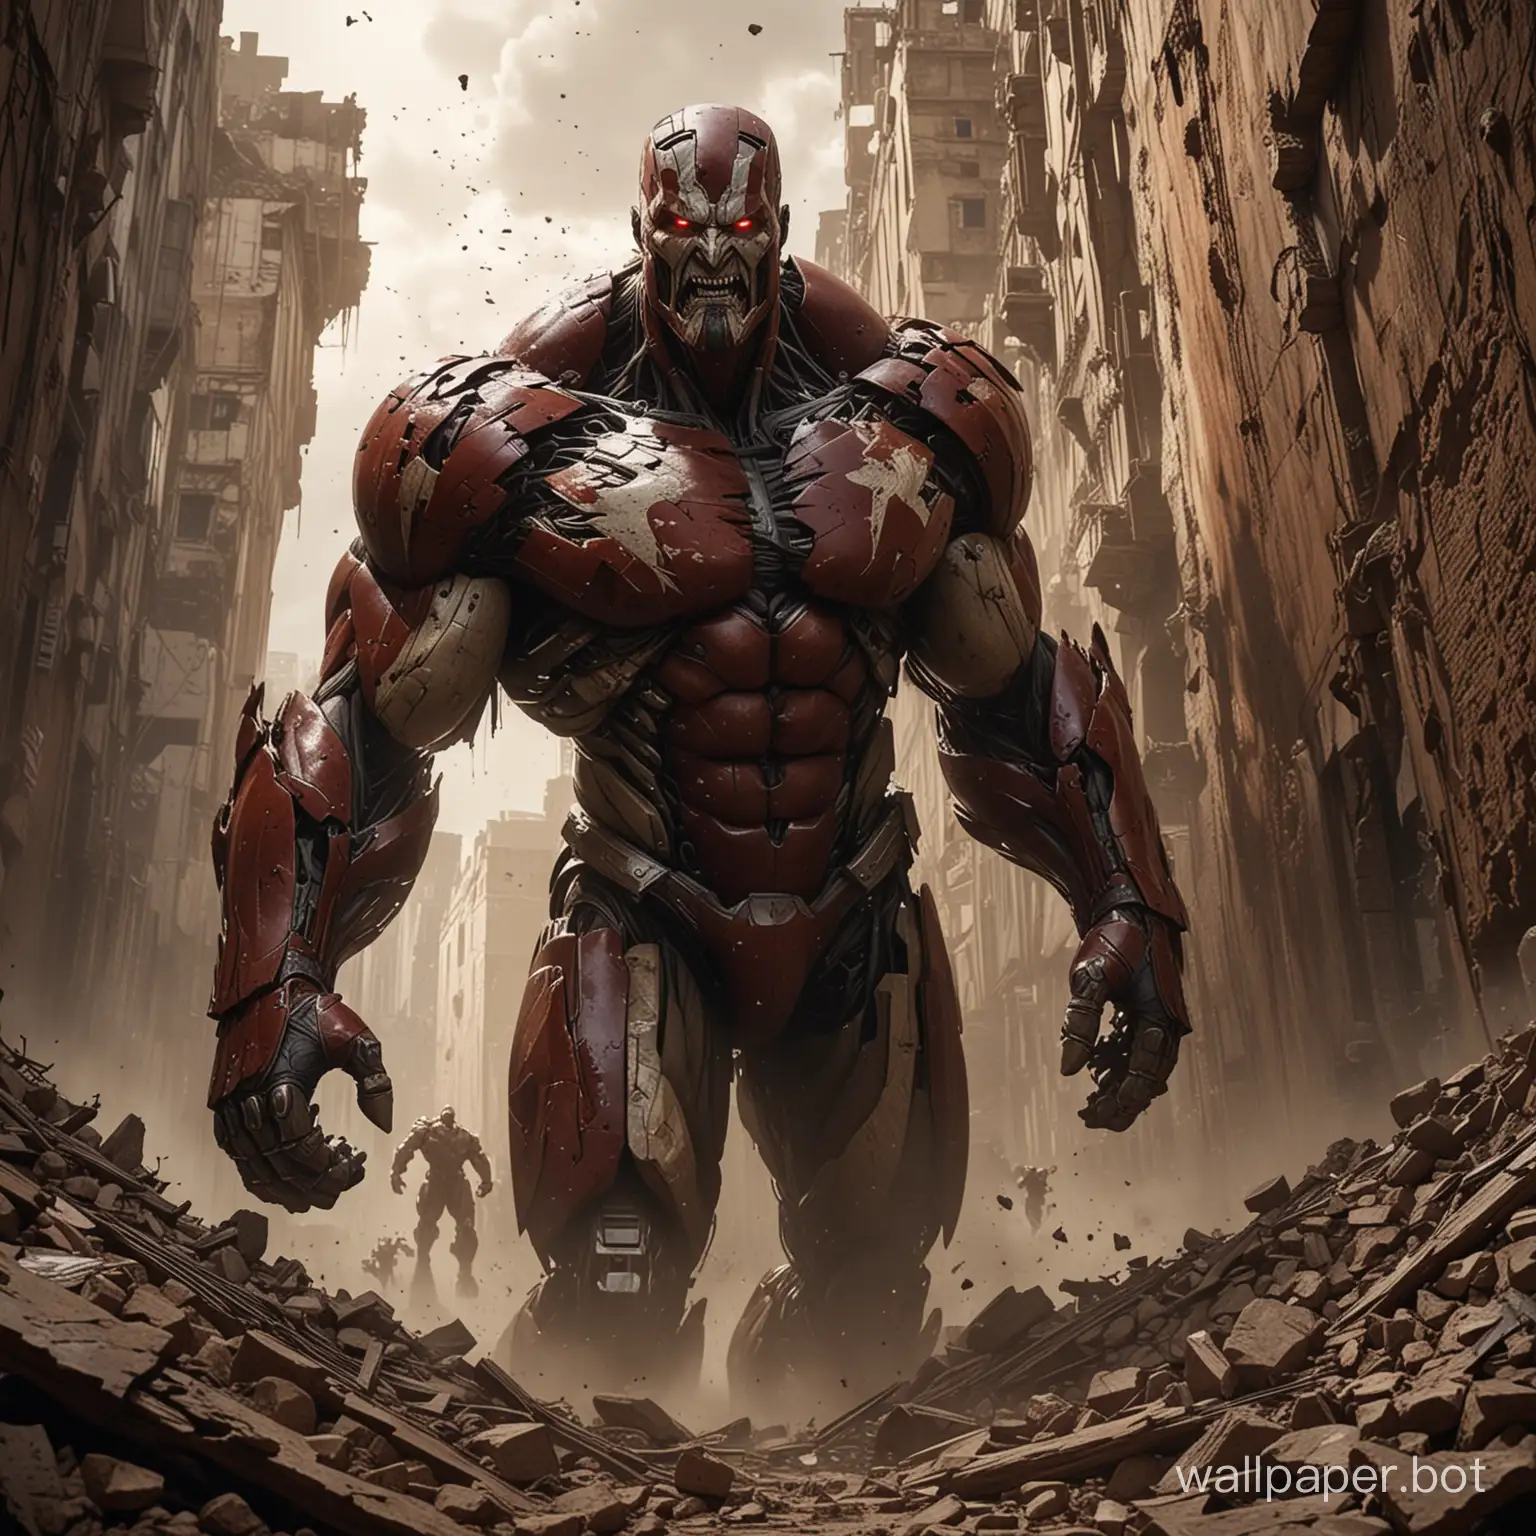 Colossal-Titan-Breaches-City-Walls-Menacing-Destruction-in-HighDefinition